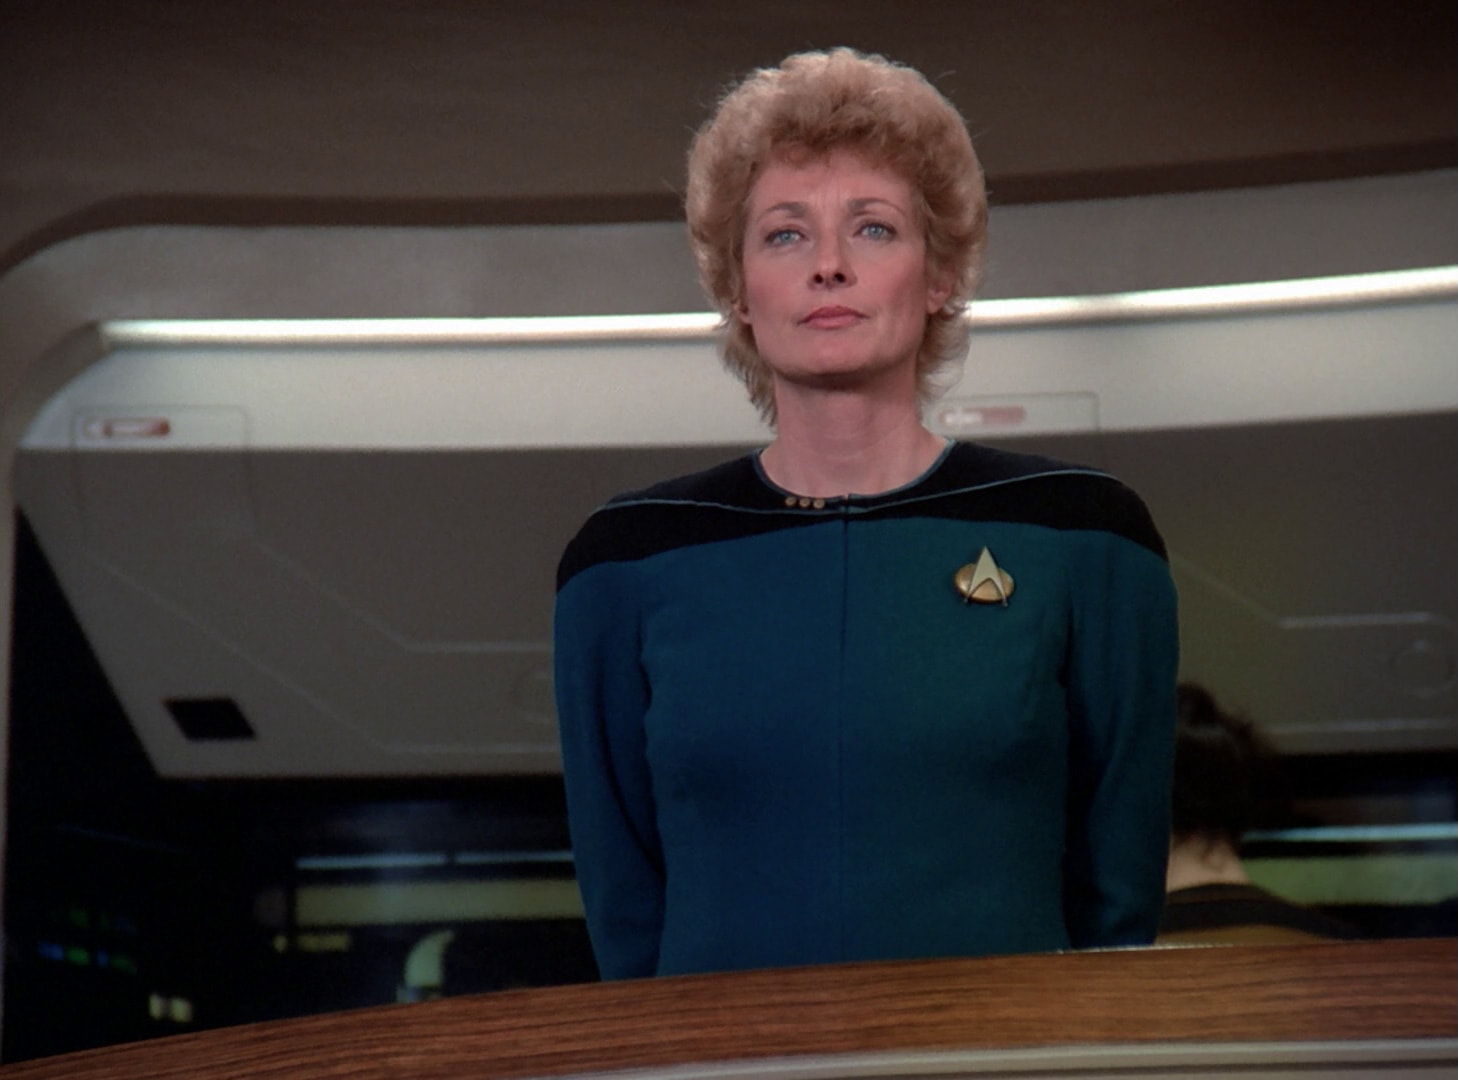 Is it Dr. Beverly Crusher or Dr. Katherine Pulaski?